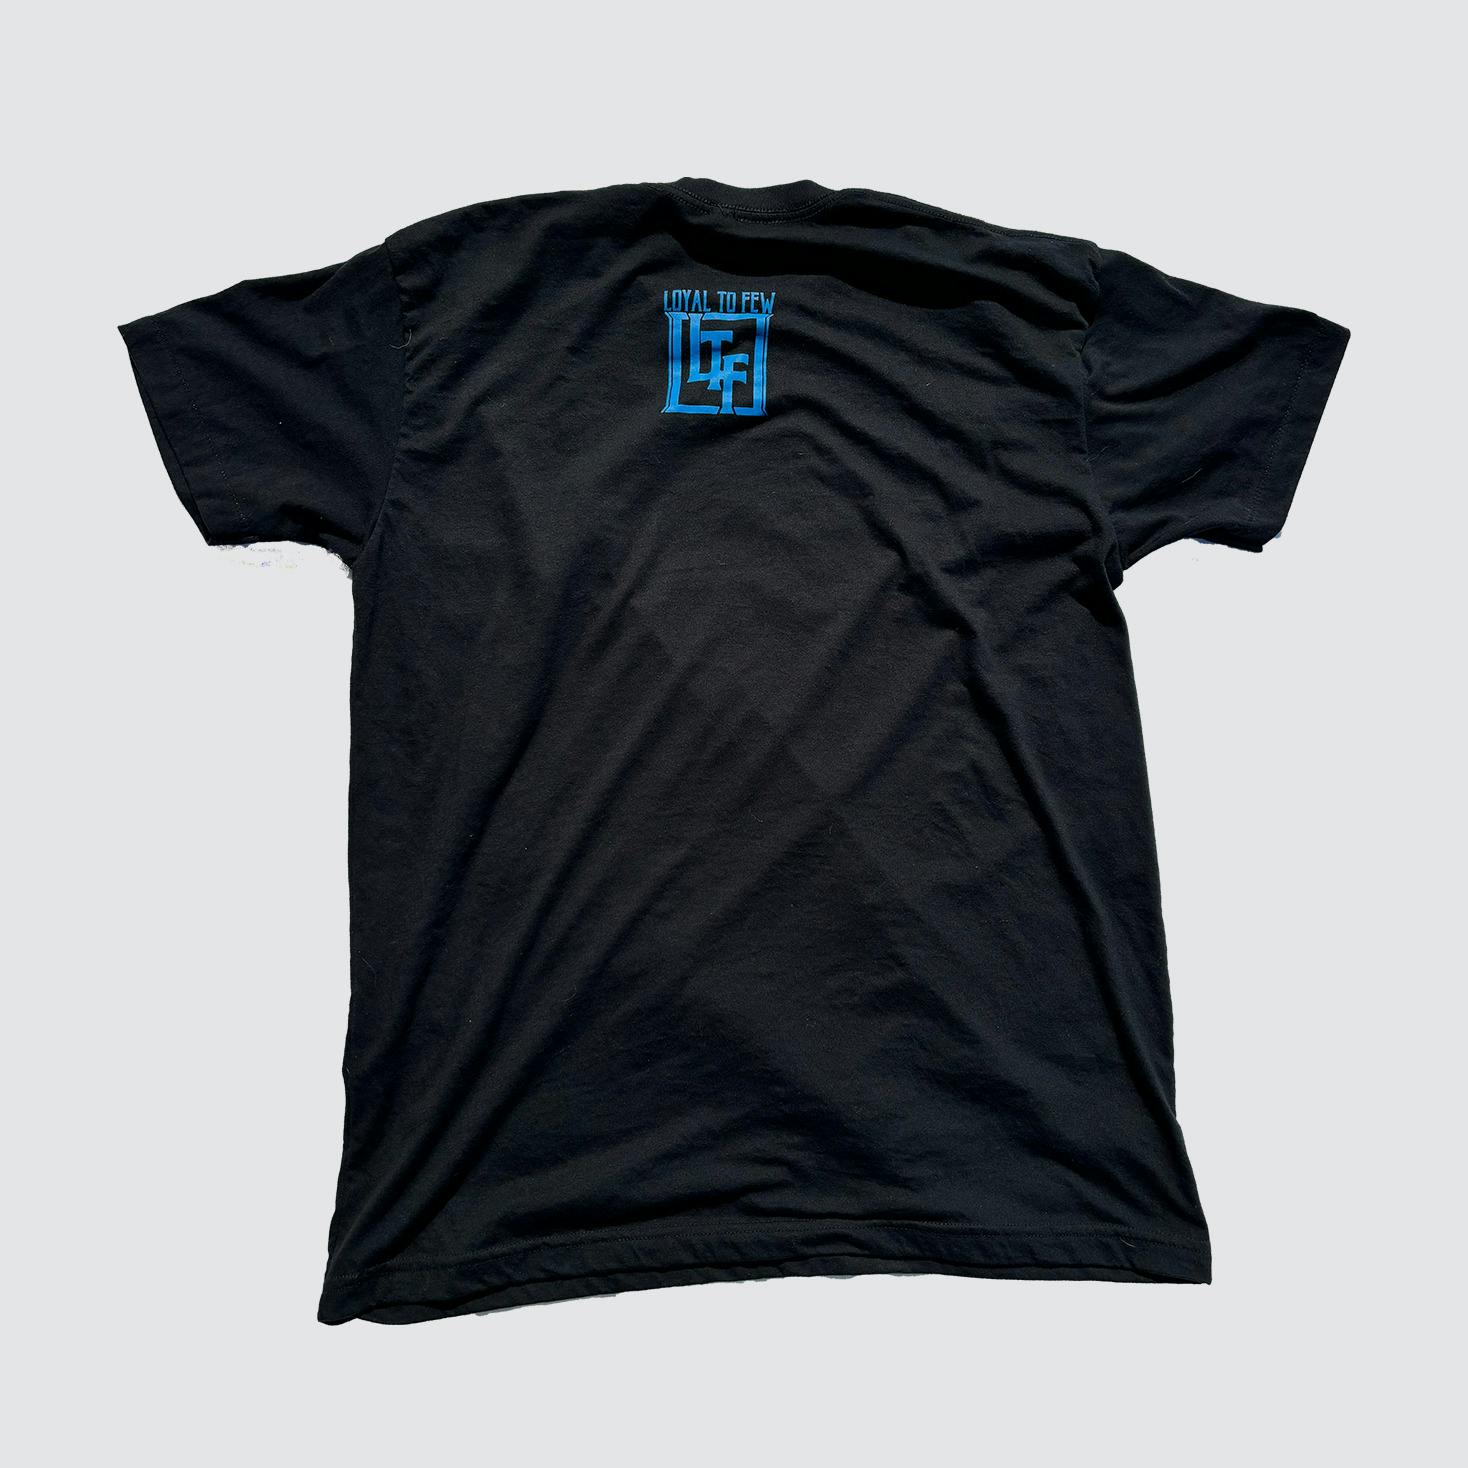 50/50 Tee with Remain True 1